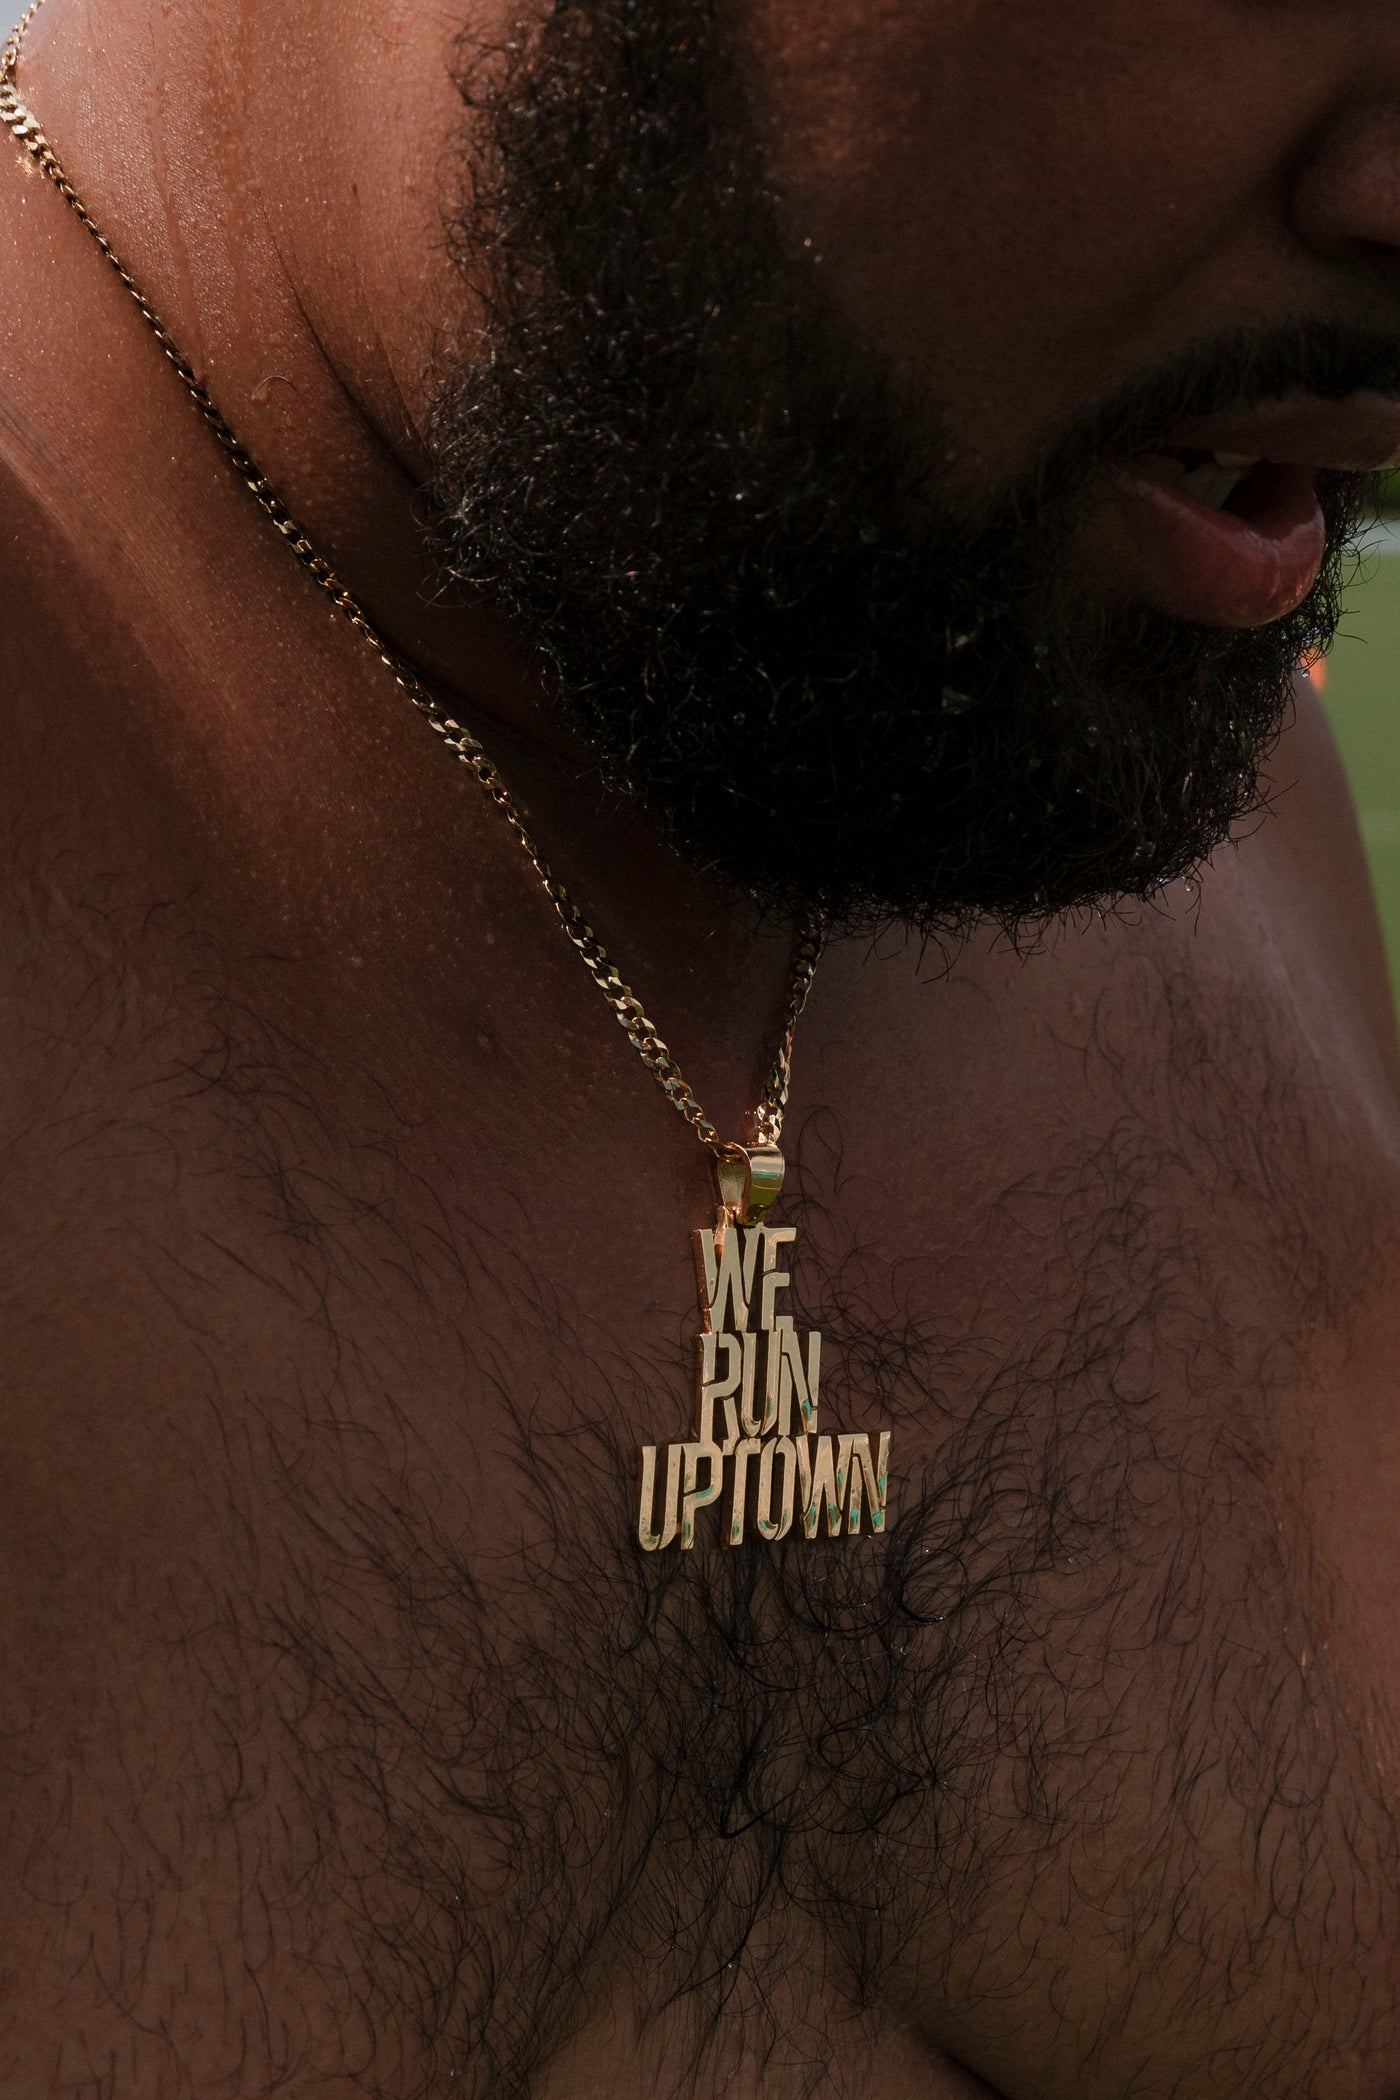 TONIGHT: Hector Espinal of NYC's We Run Uptown